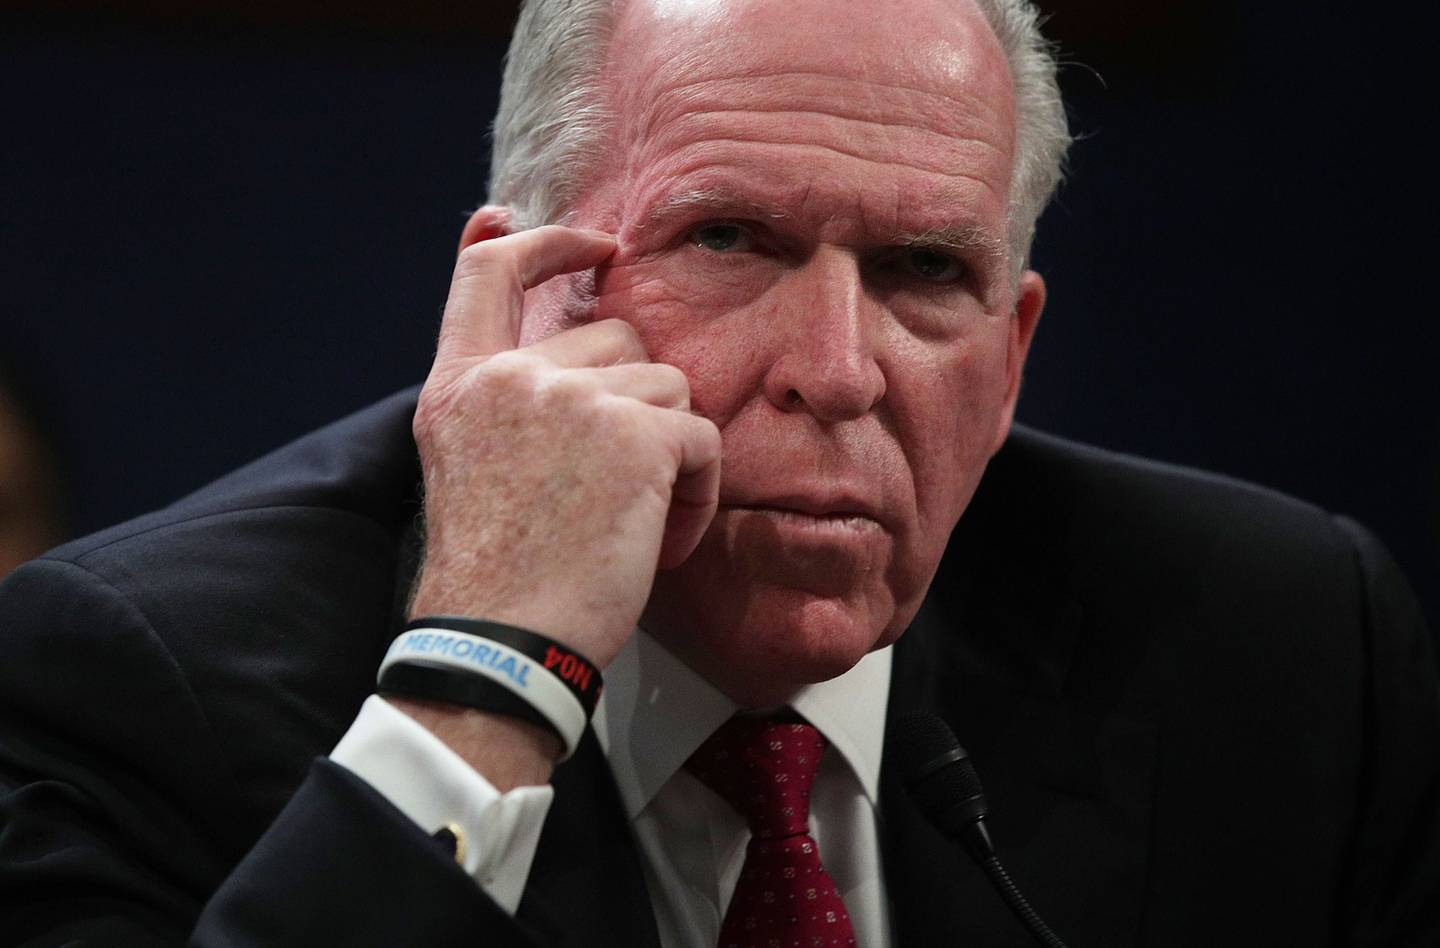 WASHINGTON, DC - MAY 23: Former Director of the U.S. Central Intelligence Agency (CIA) John Brennan testifies before the House Permanent Select Committee on Intelligence on Capitol Hill, May 23, 2017 in Washington, DC. Brennan is discussing the extent of Russia's meddling in the 2016 U.S. presidential election and possible ties to the campaign of President Donald Trump.   Alex Wong/Getty Images/AFP